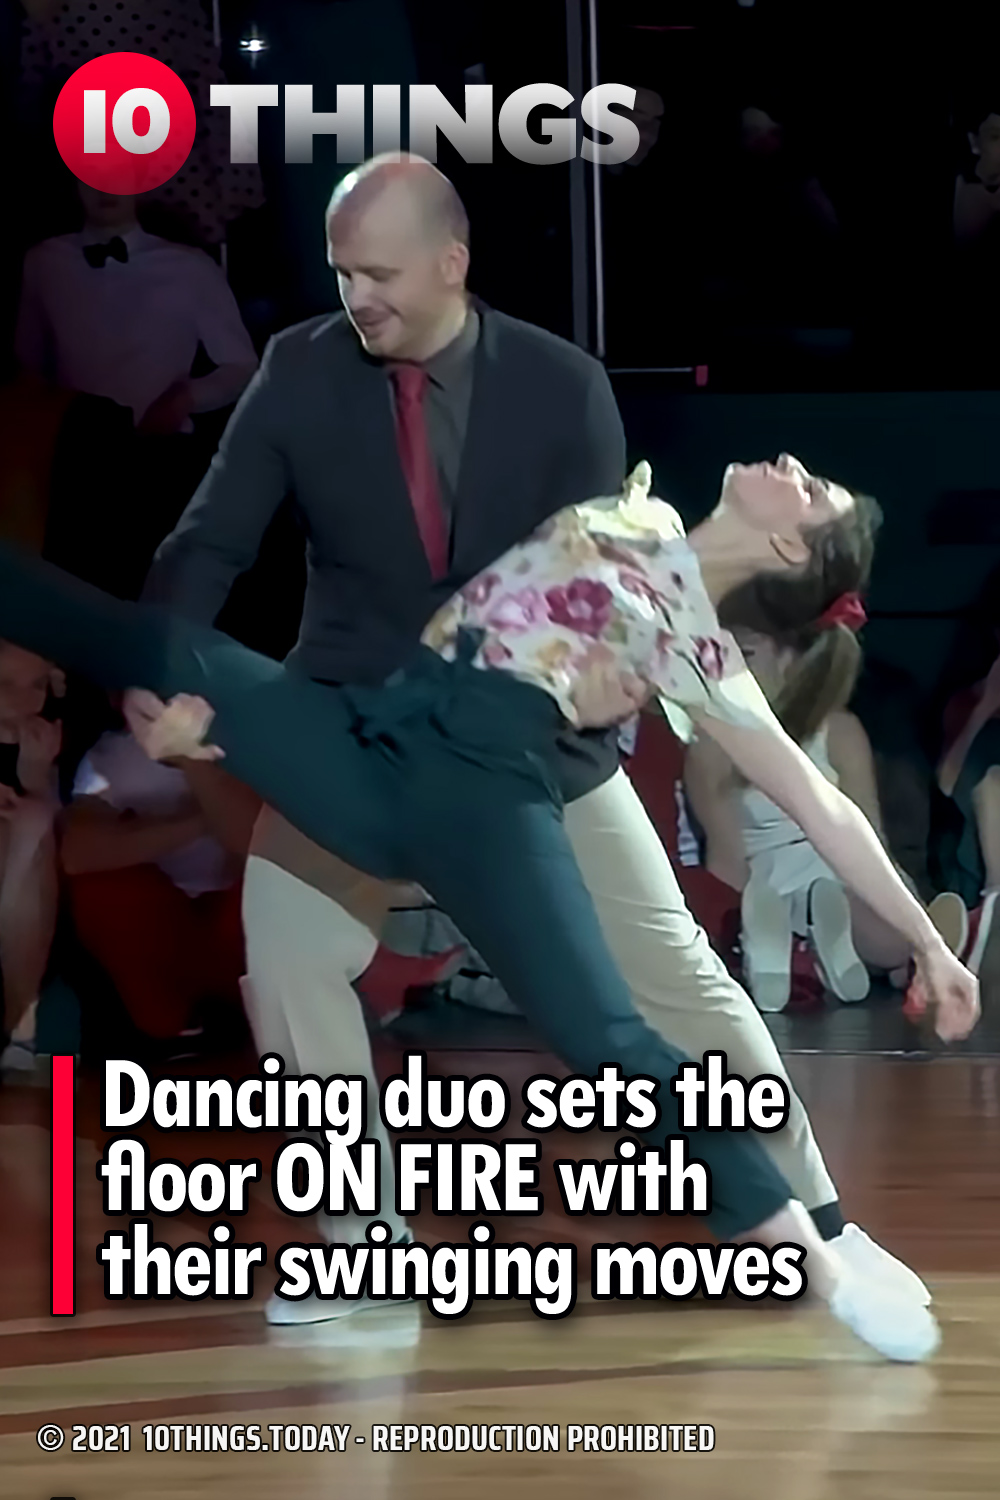 Dancing duo sets the floor ON FIRE with their swinging moves